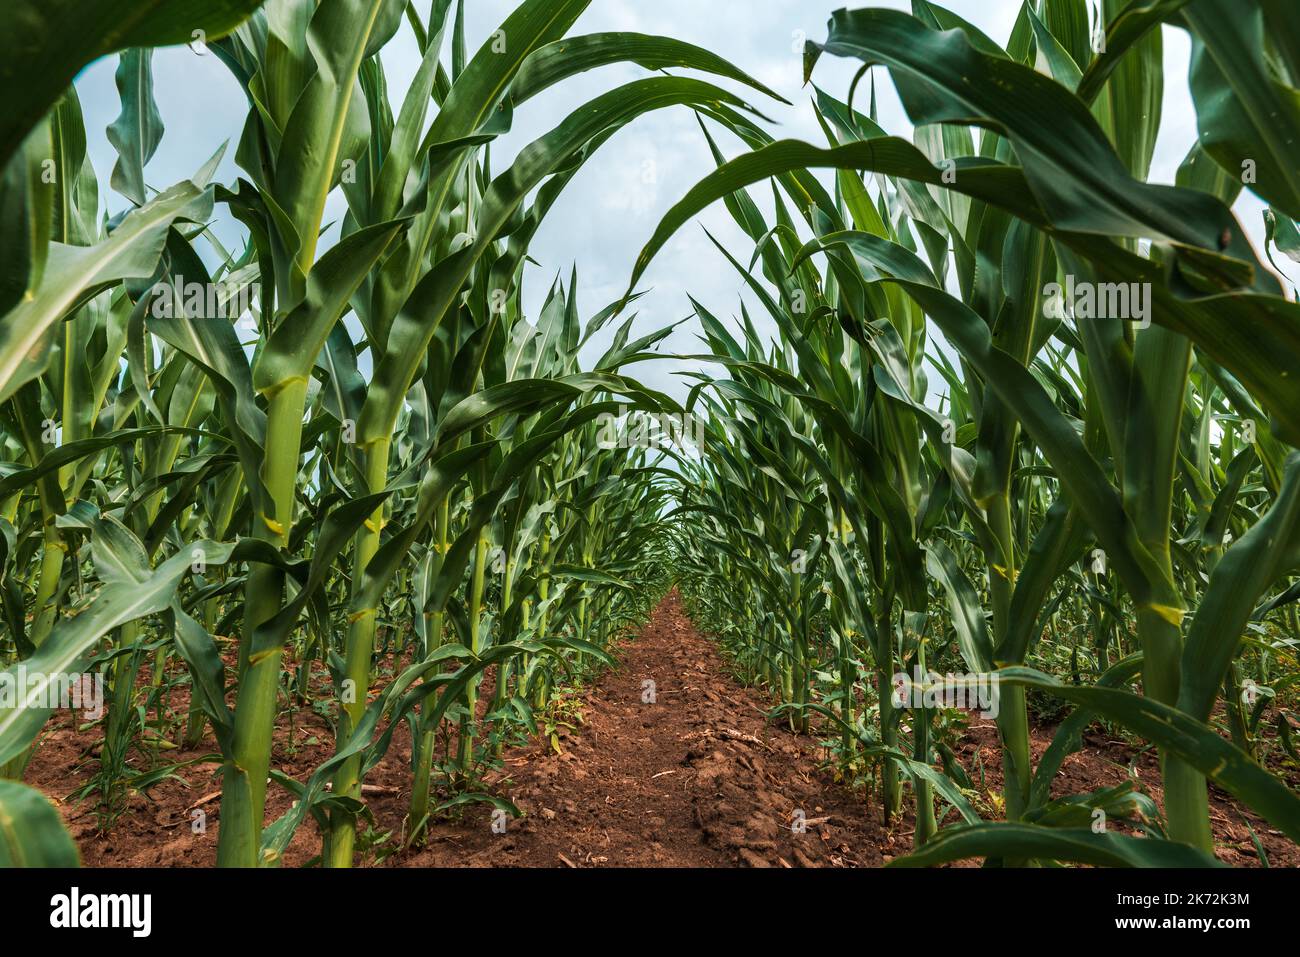 Corn plantation. Young green maize crops in cultivated field in diminishing perspective. Selective focus. Stock Photo